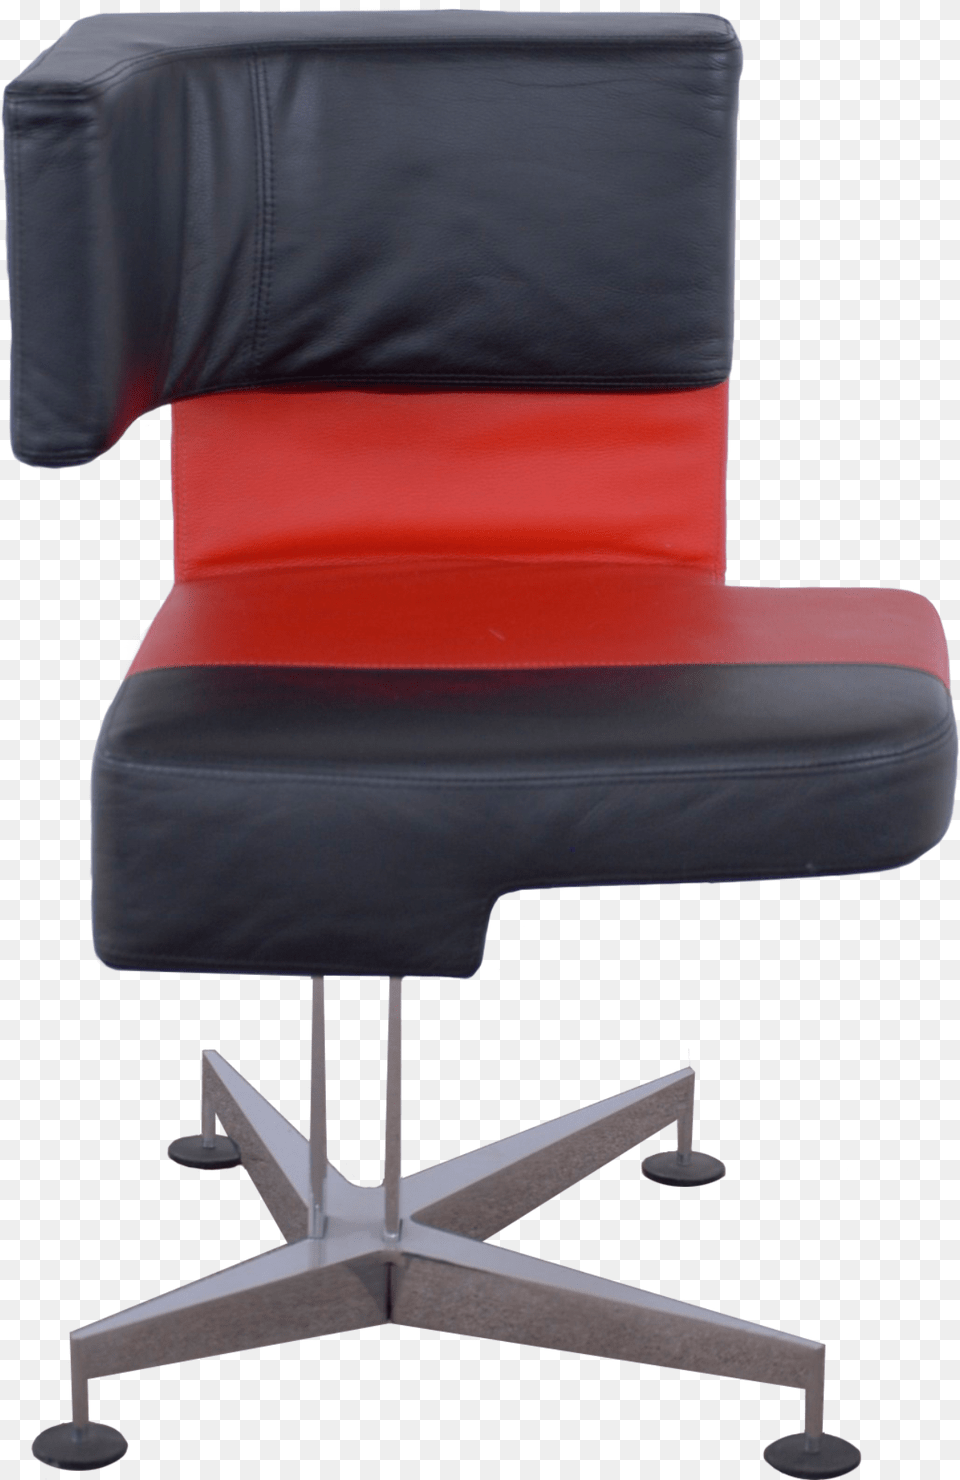 Marc Newson Style Desk Chair By Sedus Office Chair, Cushion, Furniture, Home Decor Png Image